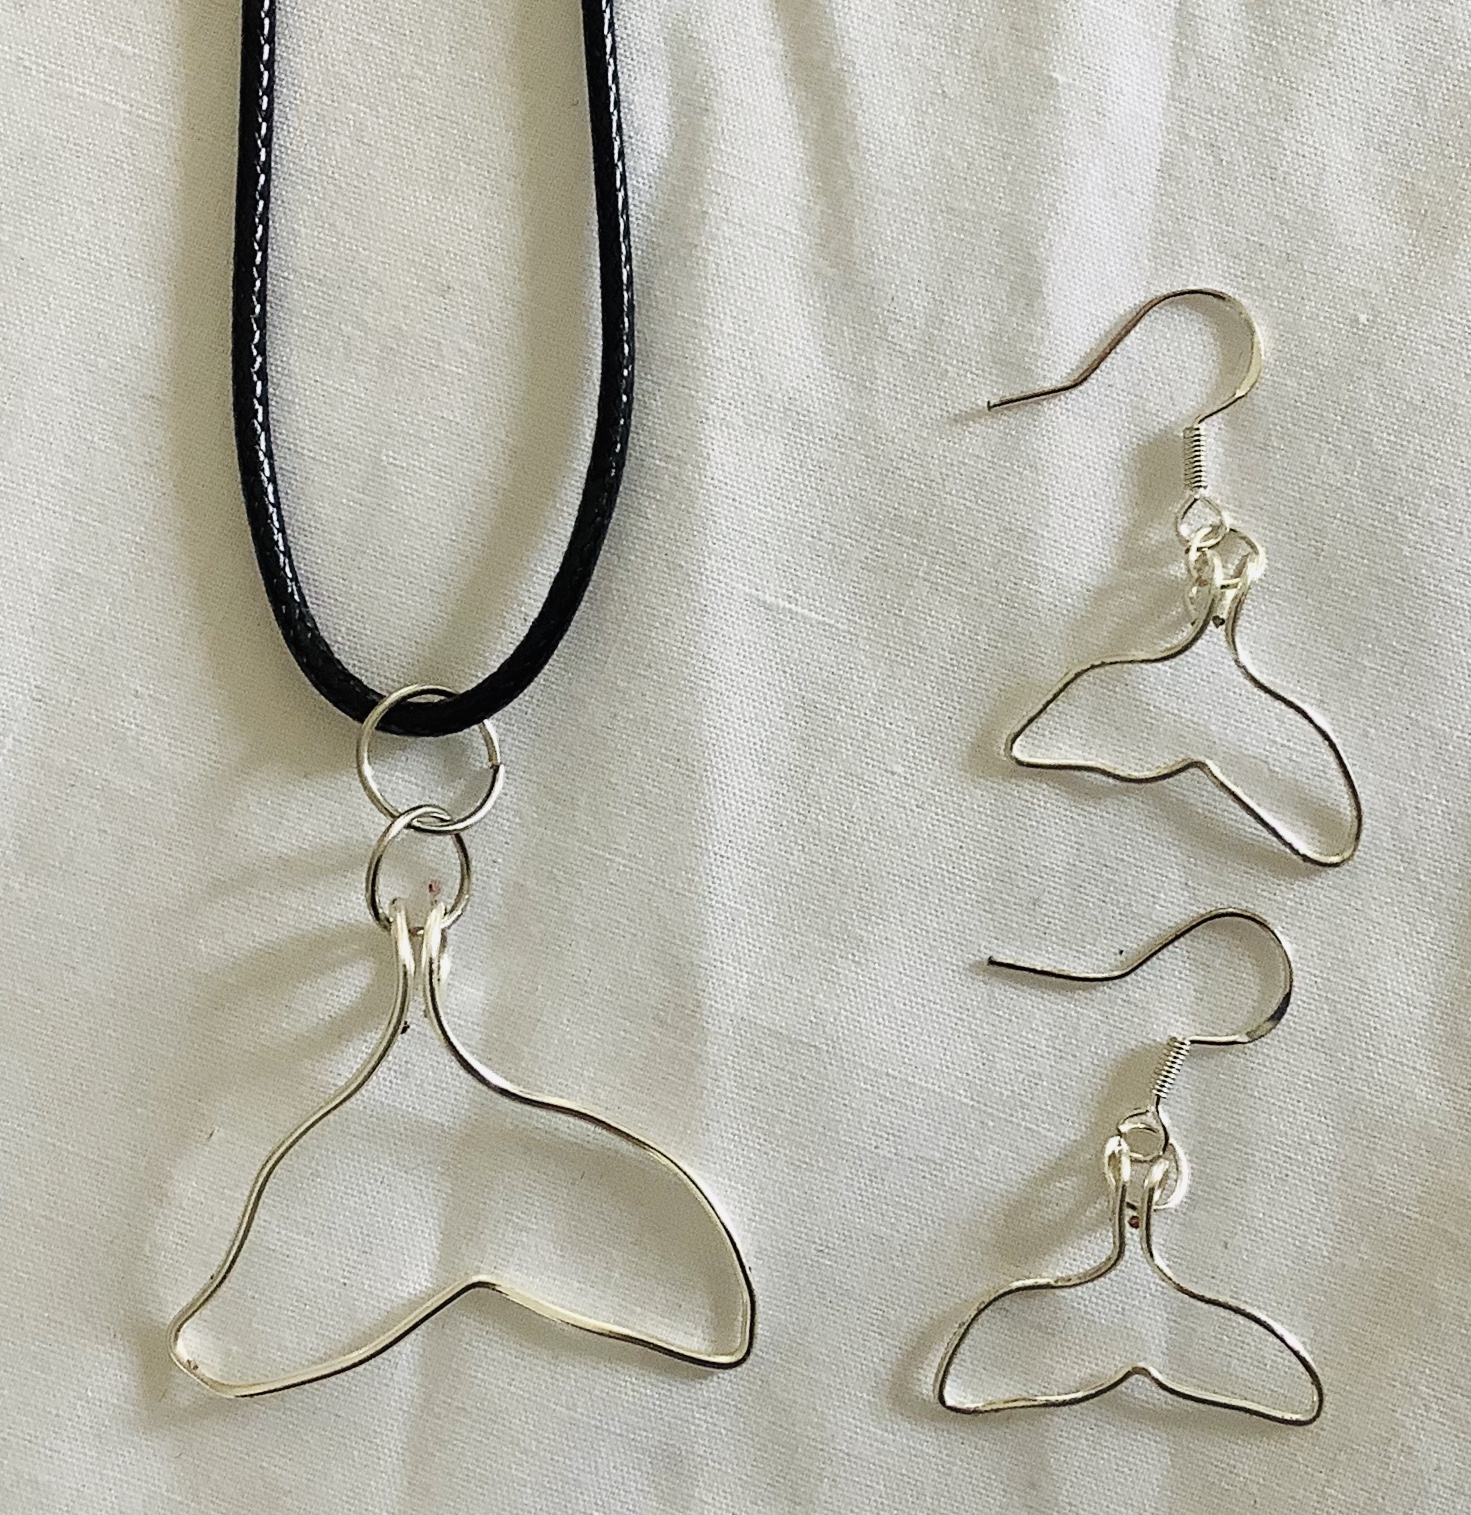 Whale Pendants and Earrings. Handcrafted individually using silver colored wire or aluminum wire. $40.00 a set or can be purchased separately.